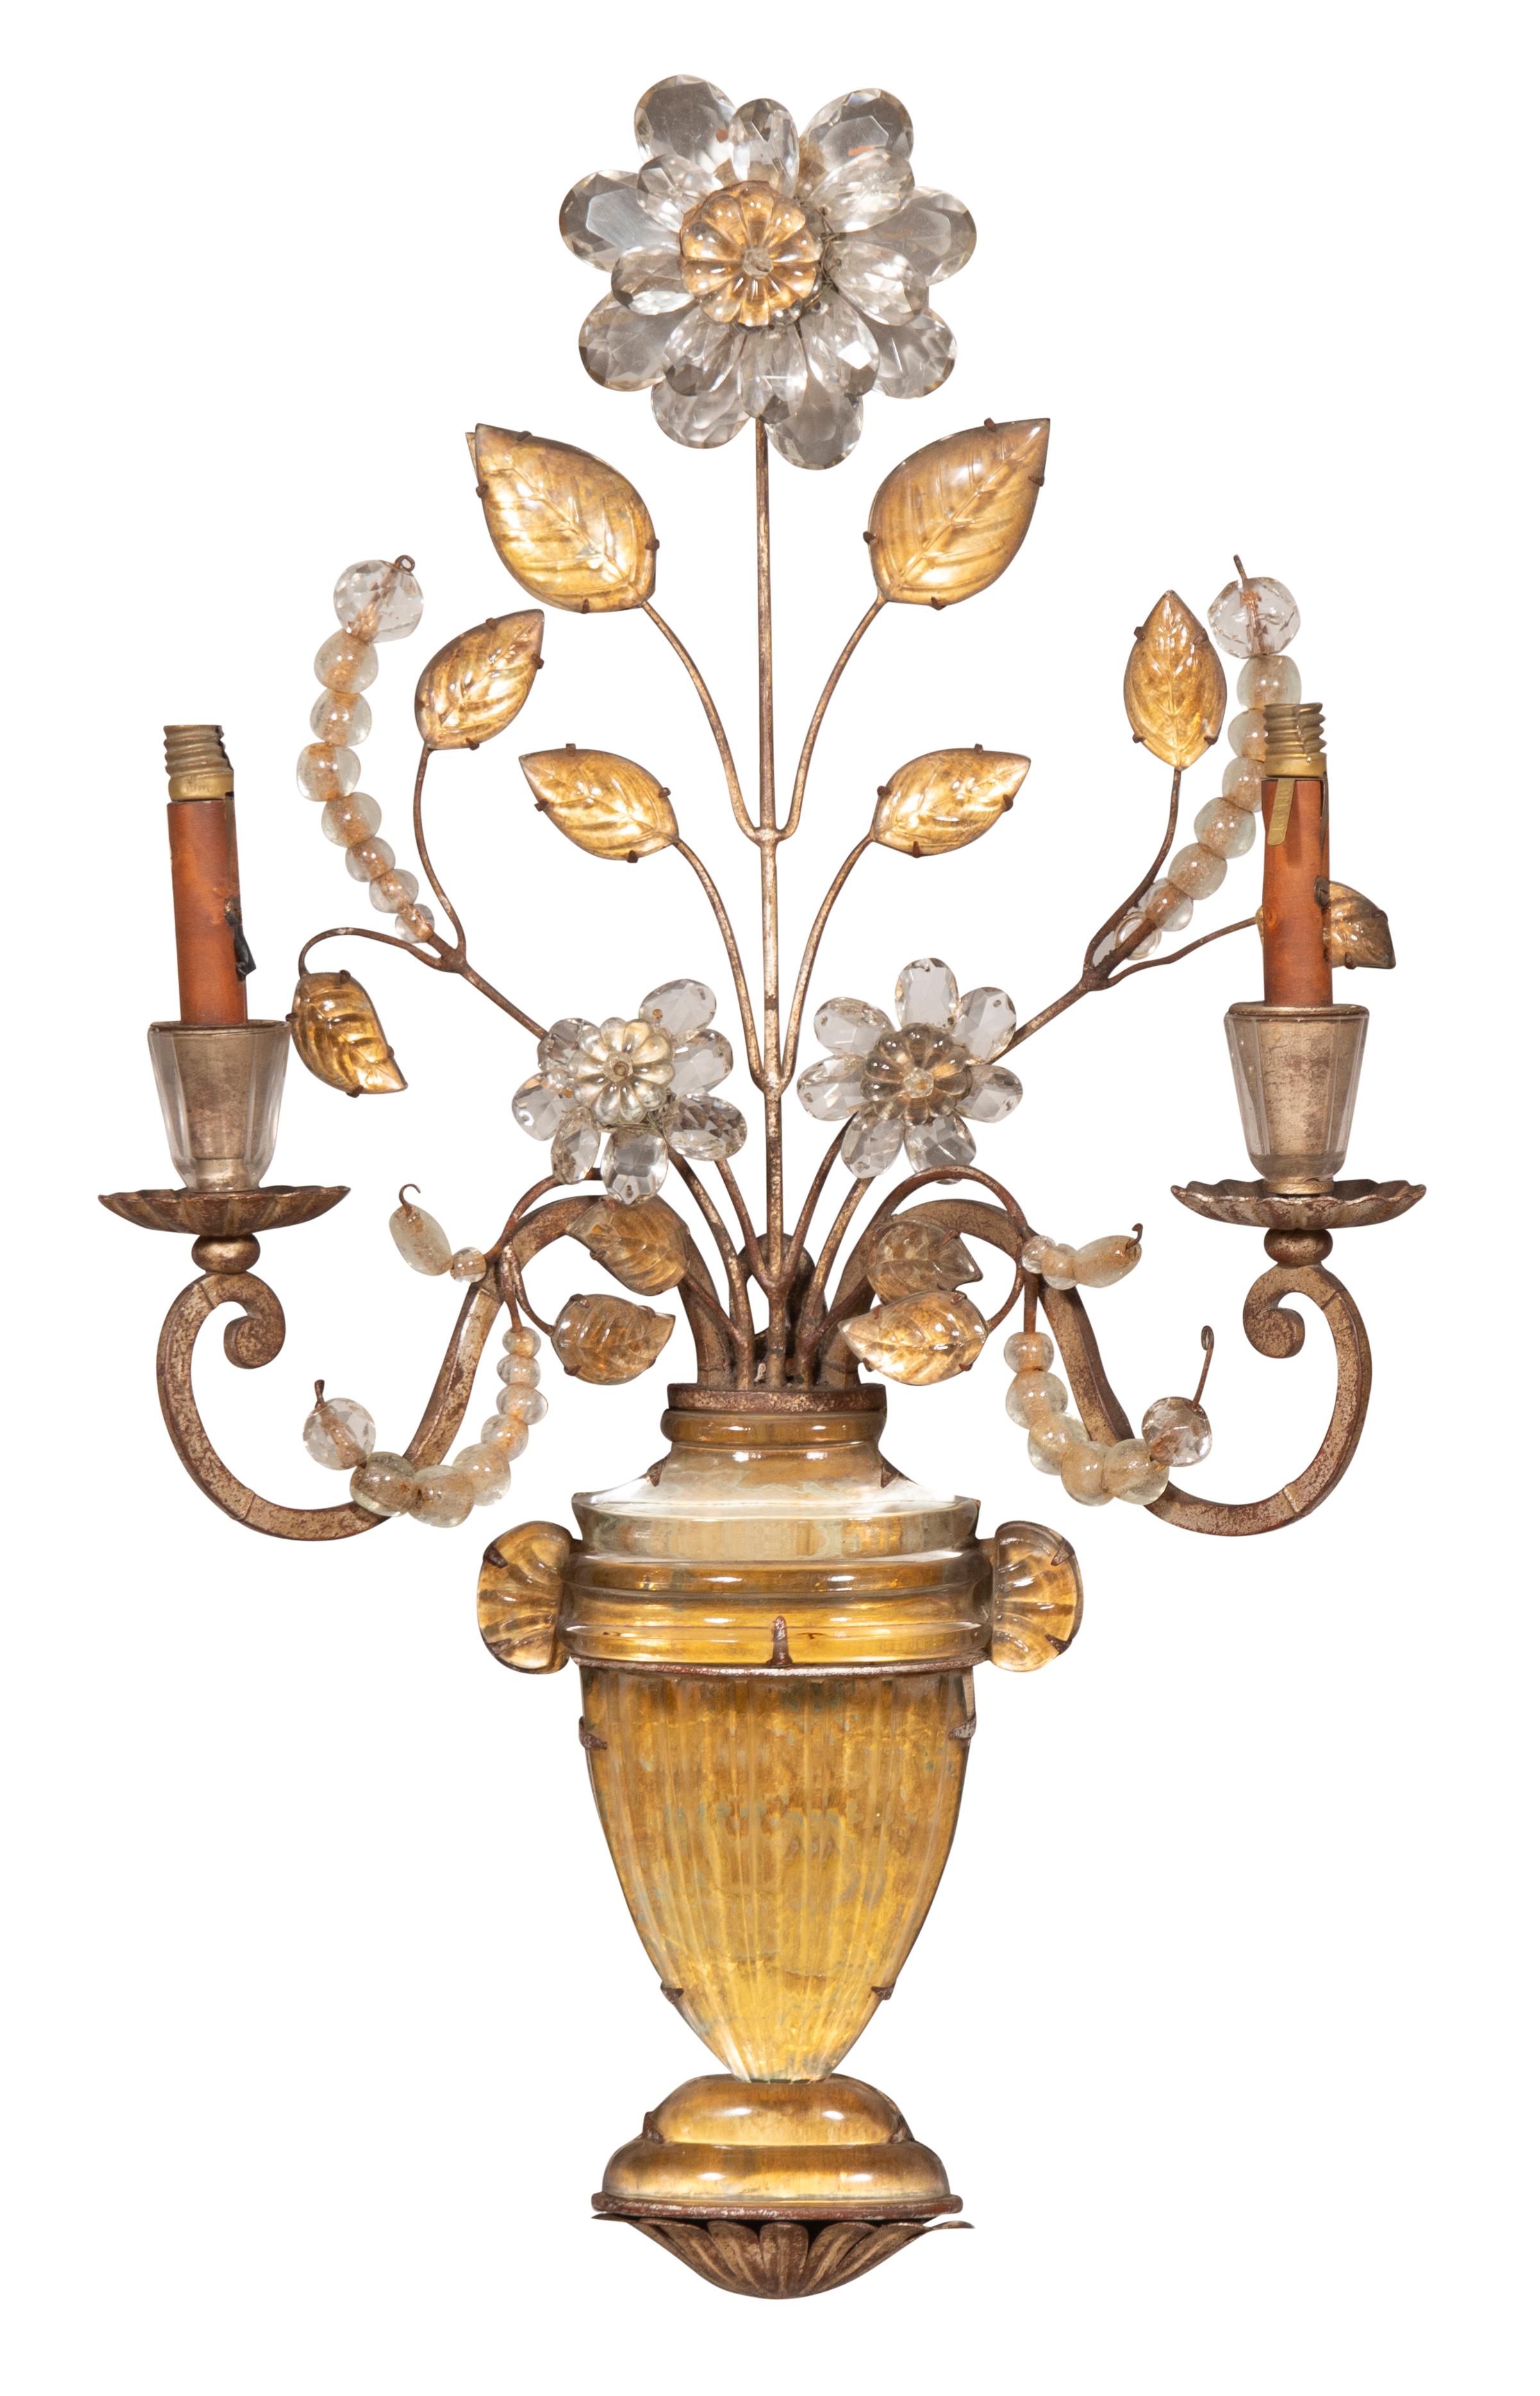 Beautiful elegant sconces with gold and clear glass tones. Two arm with central flower and leaves flowing from classical urns. Currently need wiring.